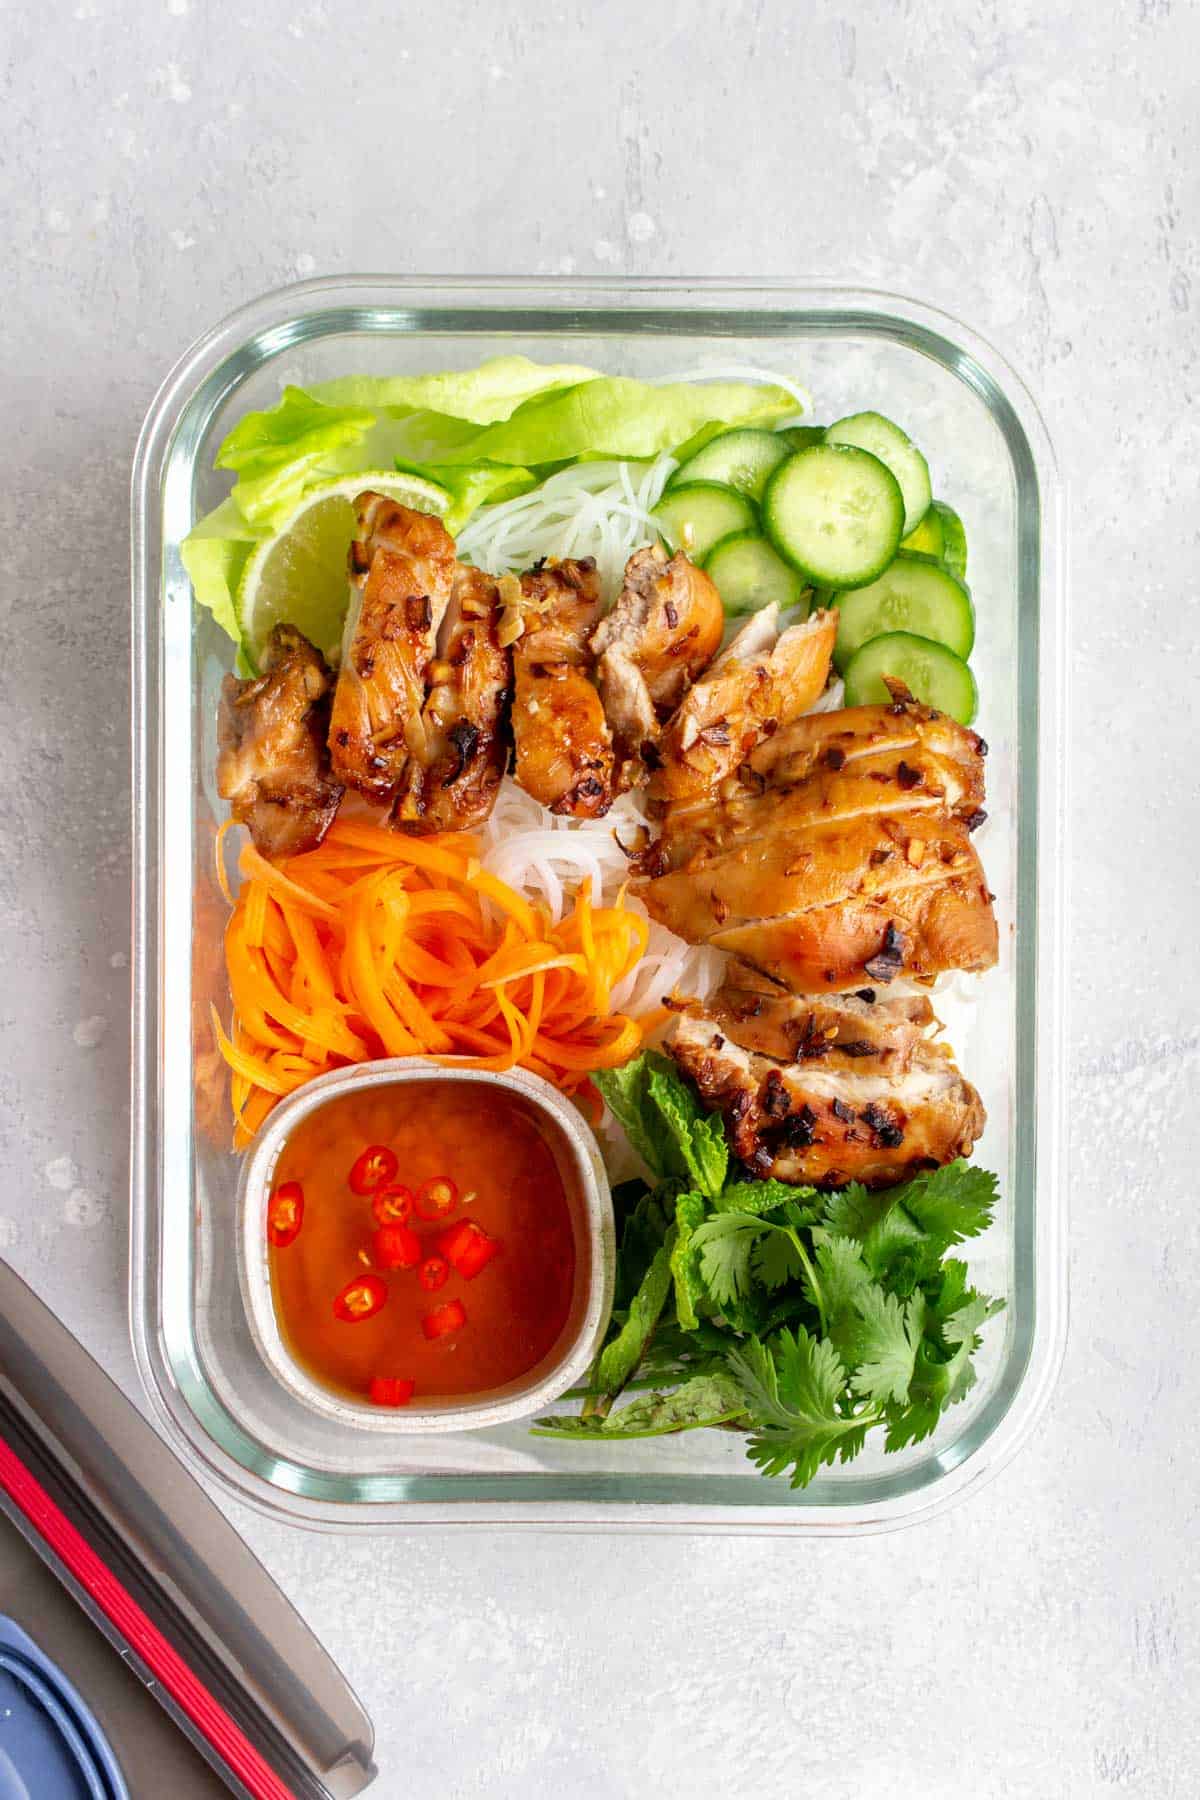 Overhead view of a meal prep container of air fryer lemongrass chicken, noodles, carrots, cilantro, cucumber, and nuoc cham.